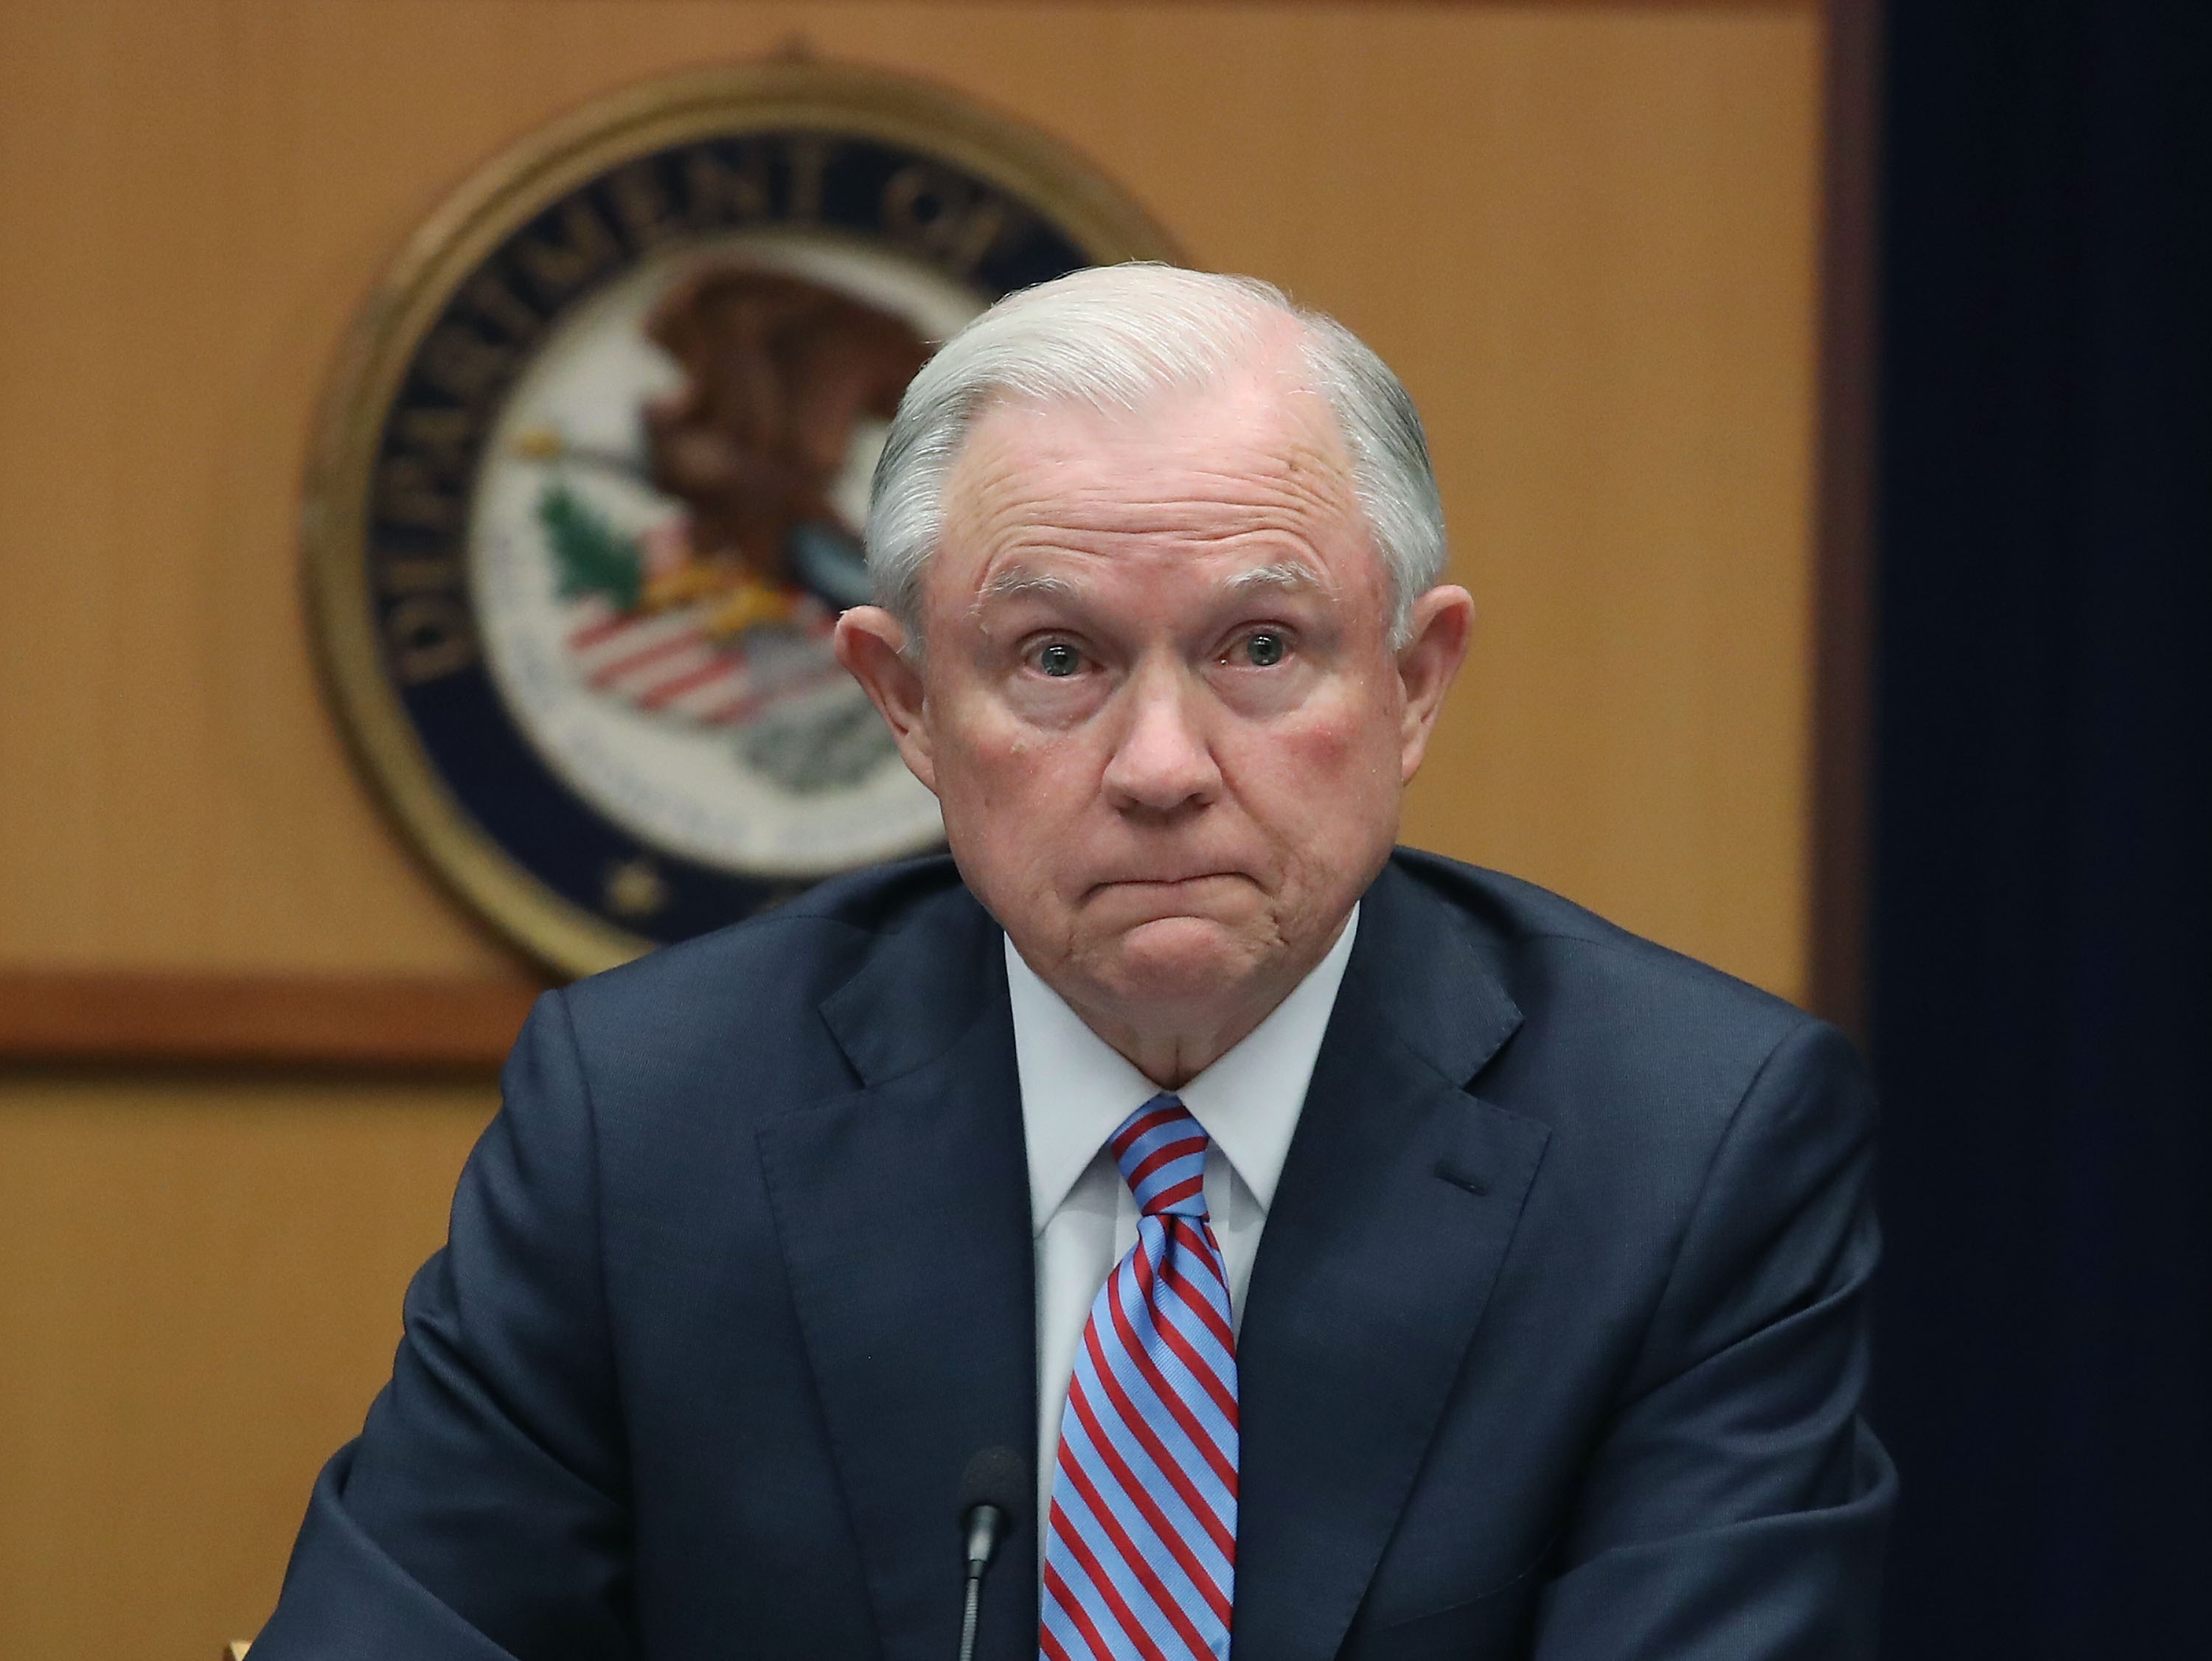 Attorney General Jeff Sessions speaks about organized gang violence at the Department of Justice, April 18, 2016 in Washington, D.C. (Mark Wilson—Getty Images)